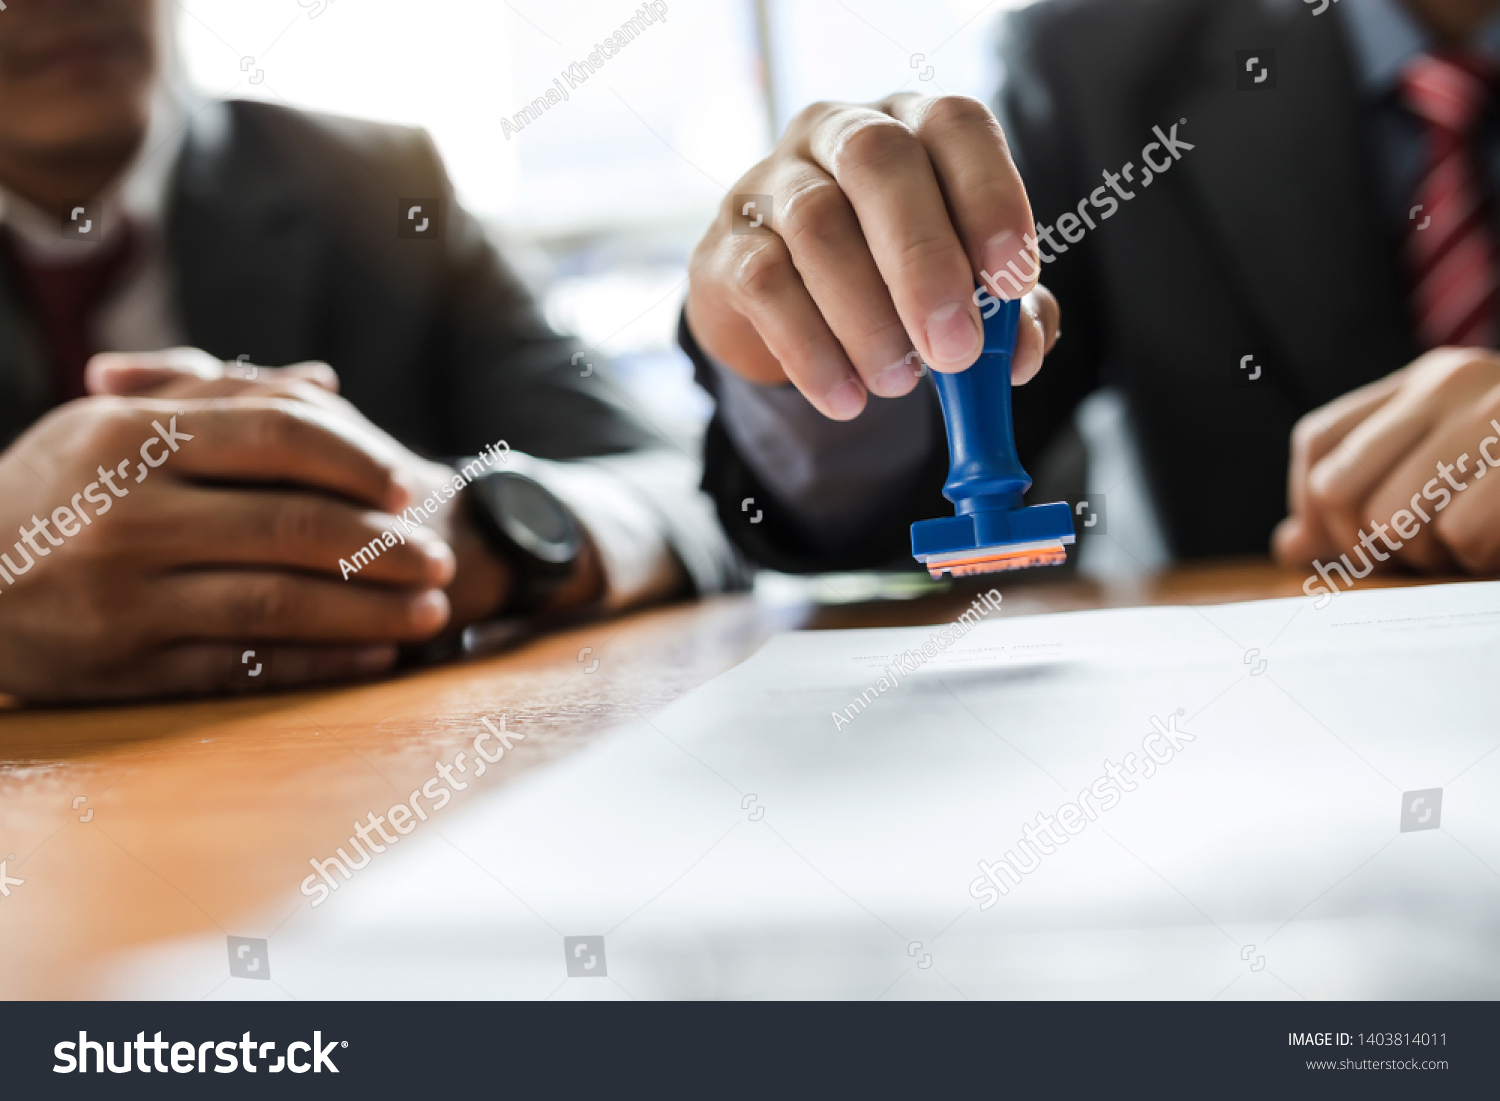 Businessman stamping with approved stamp on document at meeting. #1403814011